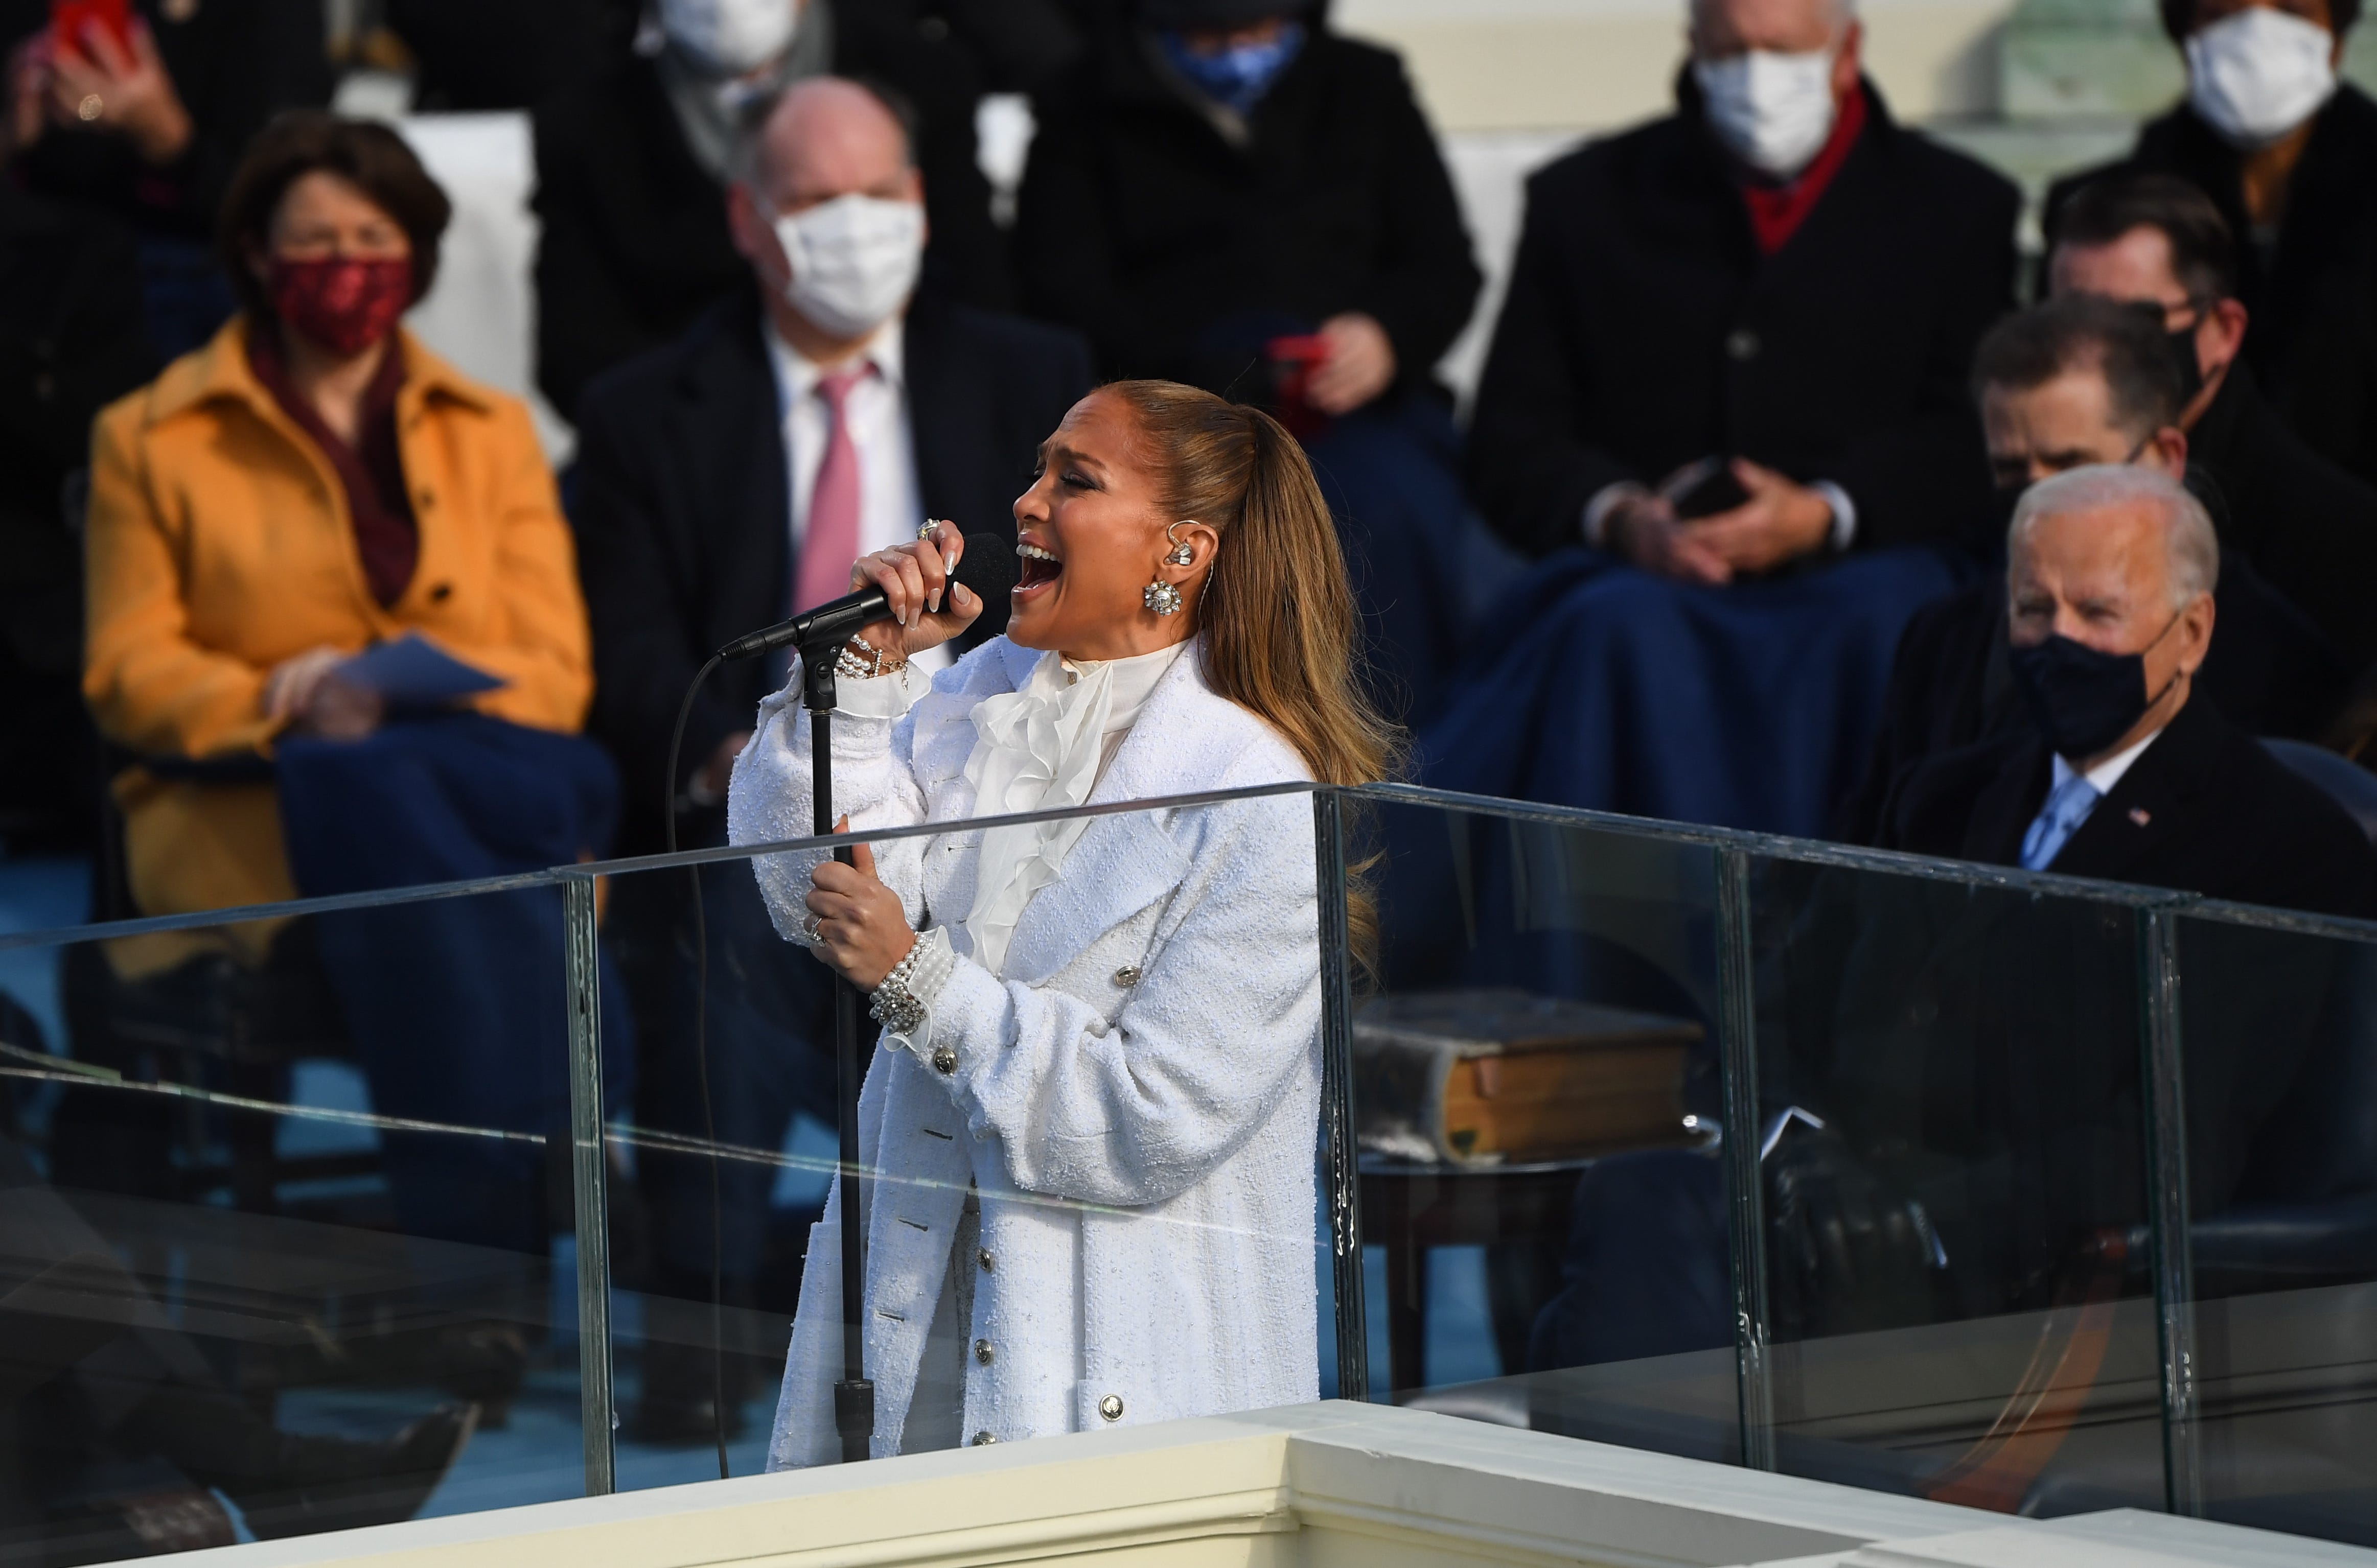 Jennifer Lopez performs during the 2021 Presidential Inauguration.